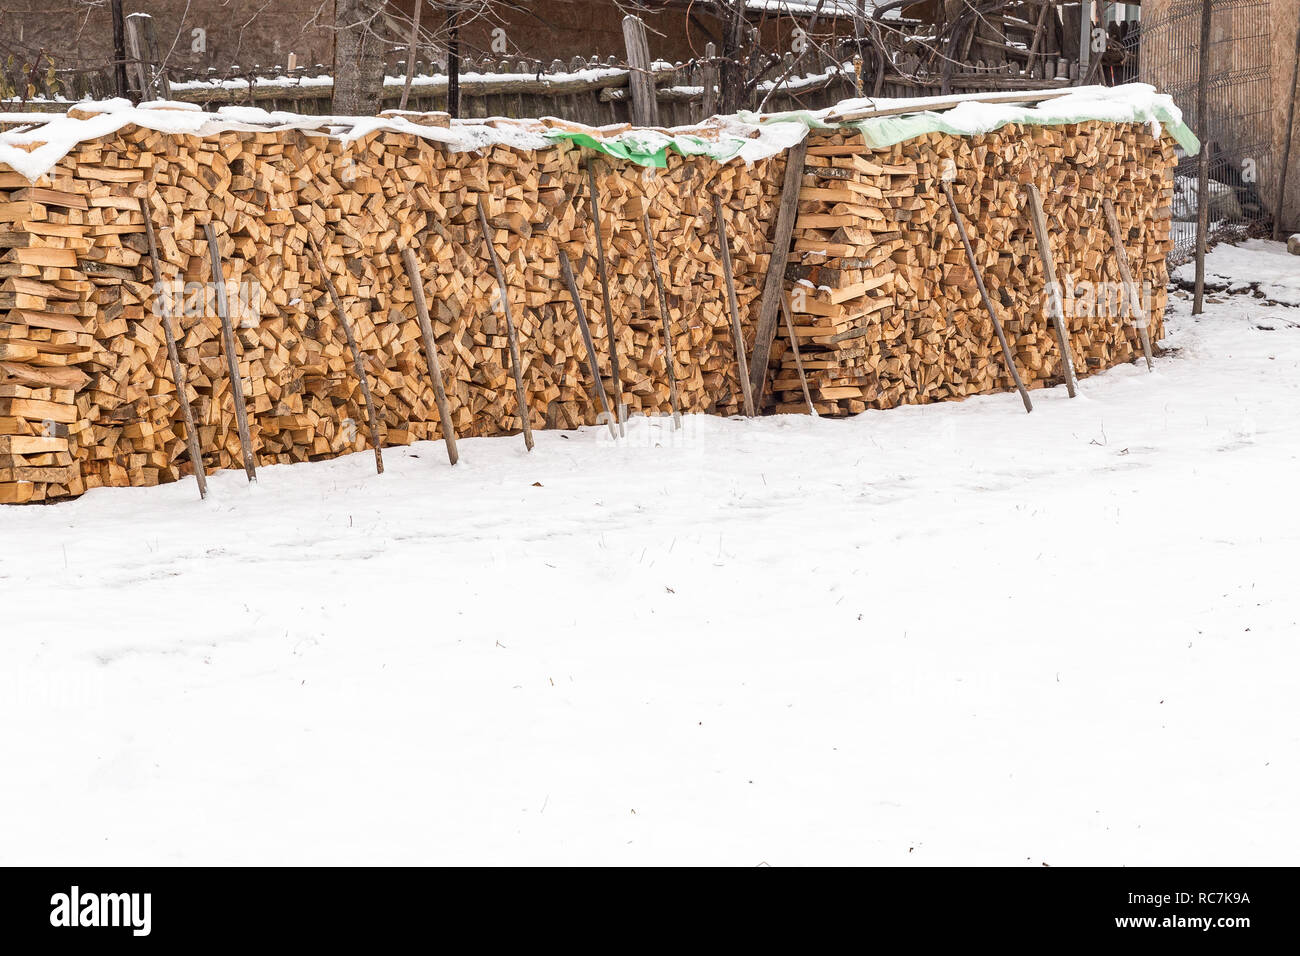 Dry chopped firewood logs stored outside. Dry chopped firewood logs ready stacked out on a snowy day. Stock Photo